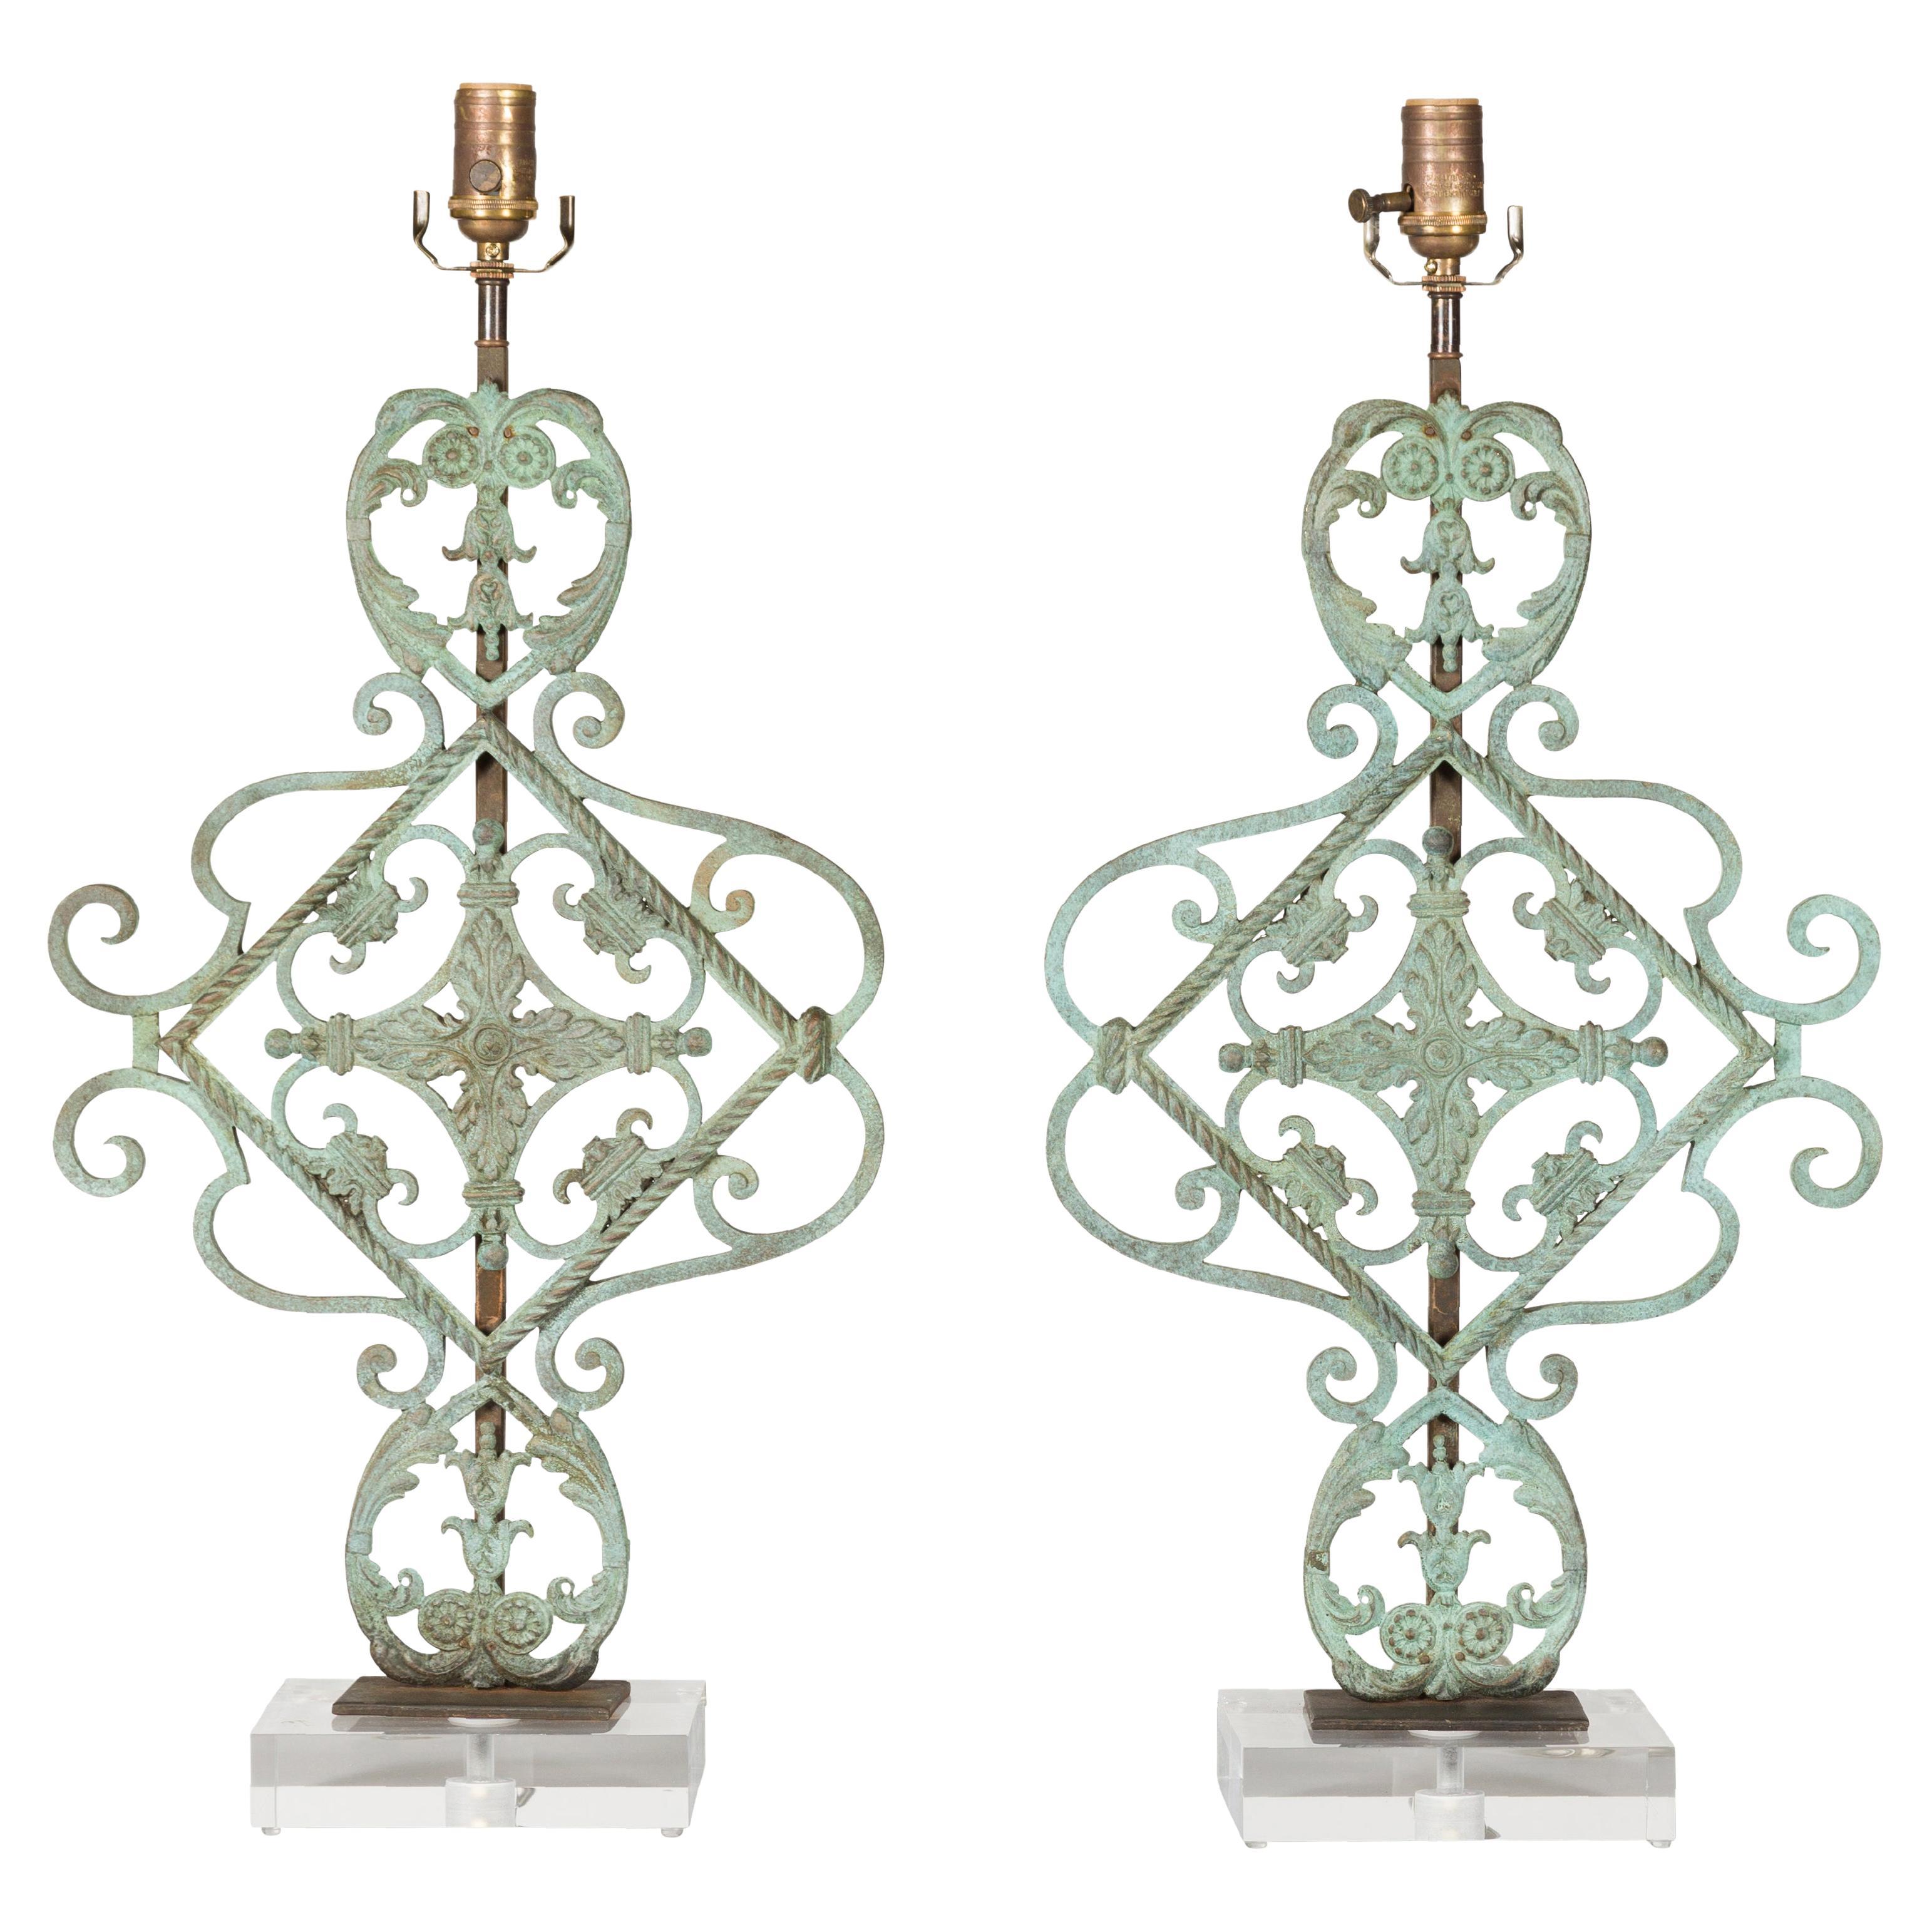 Italian Bronze Midcentury Table Lamps with Scrolling Motifs, on Lucite Bases